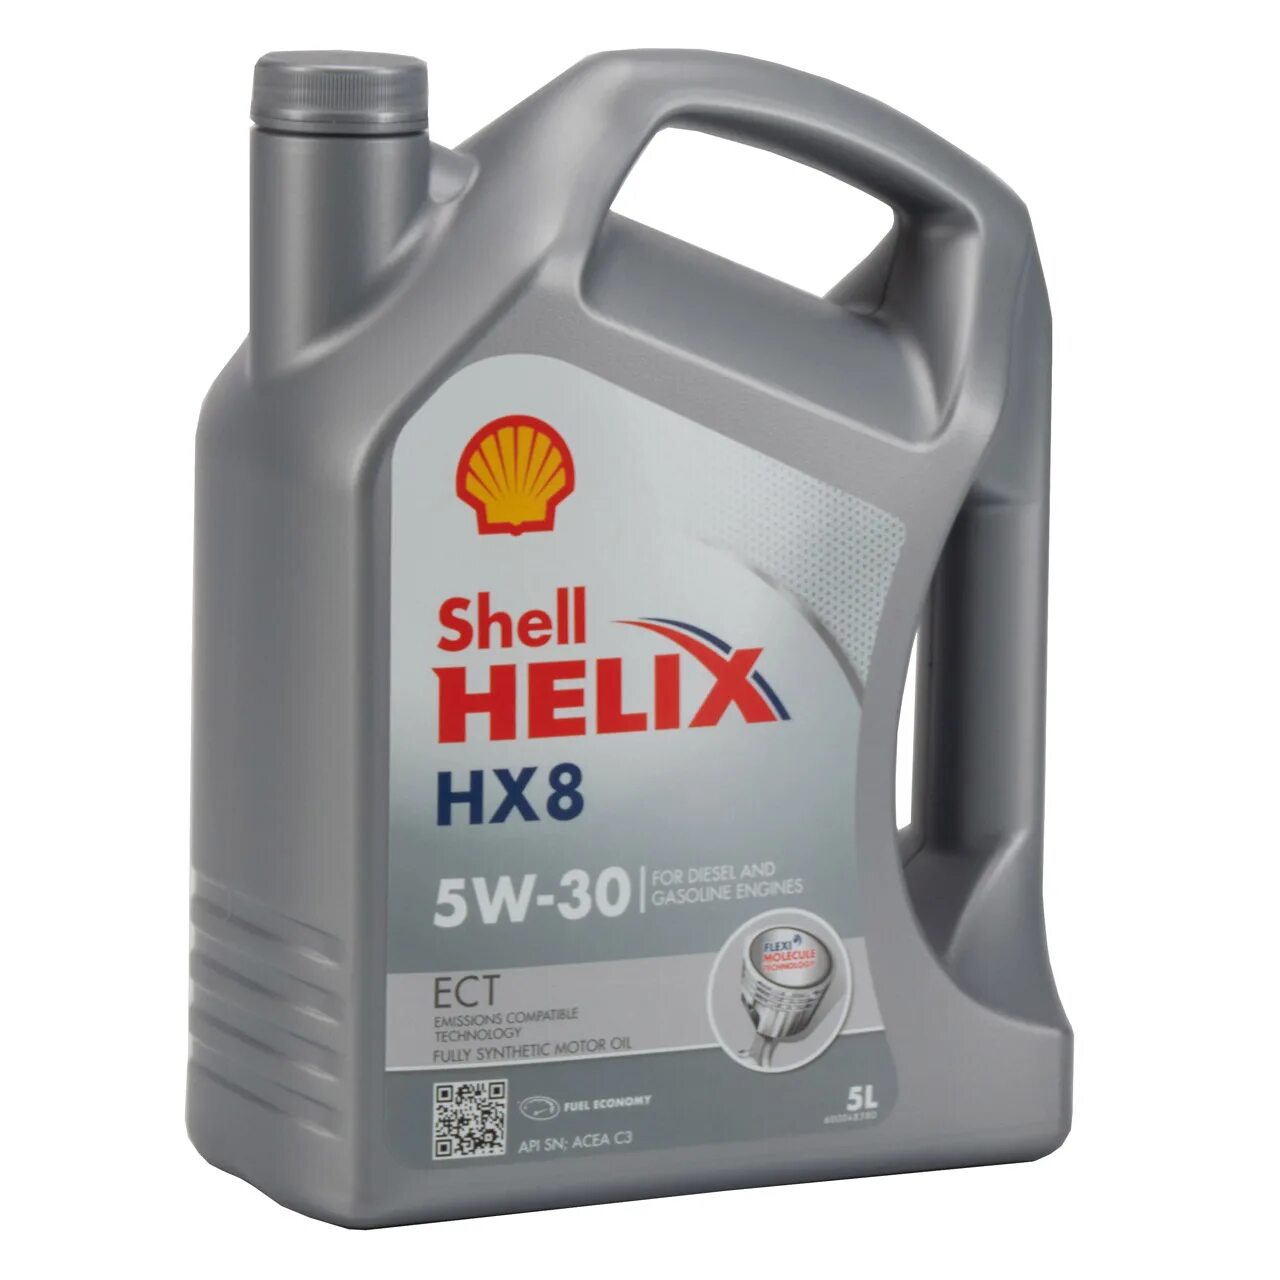 Shell 5w30 ect c3. Shell 5w30 229.51. Shell Ultra ect c3 5w30 4л. Shell Helix hx8 ect 5w-30. Масло shell ect 5w30